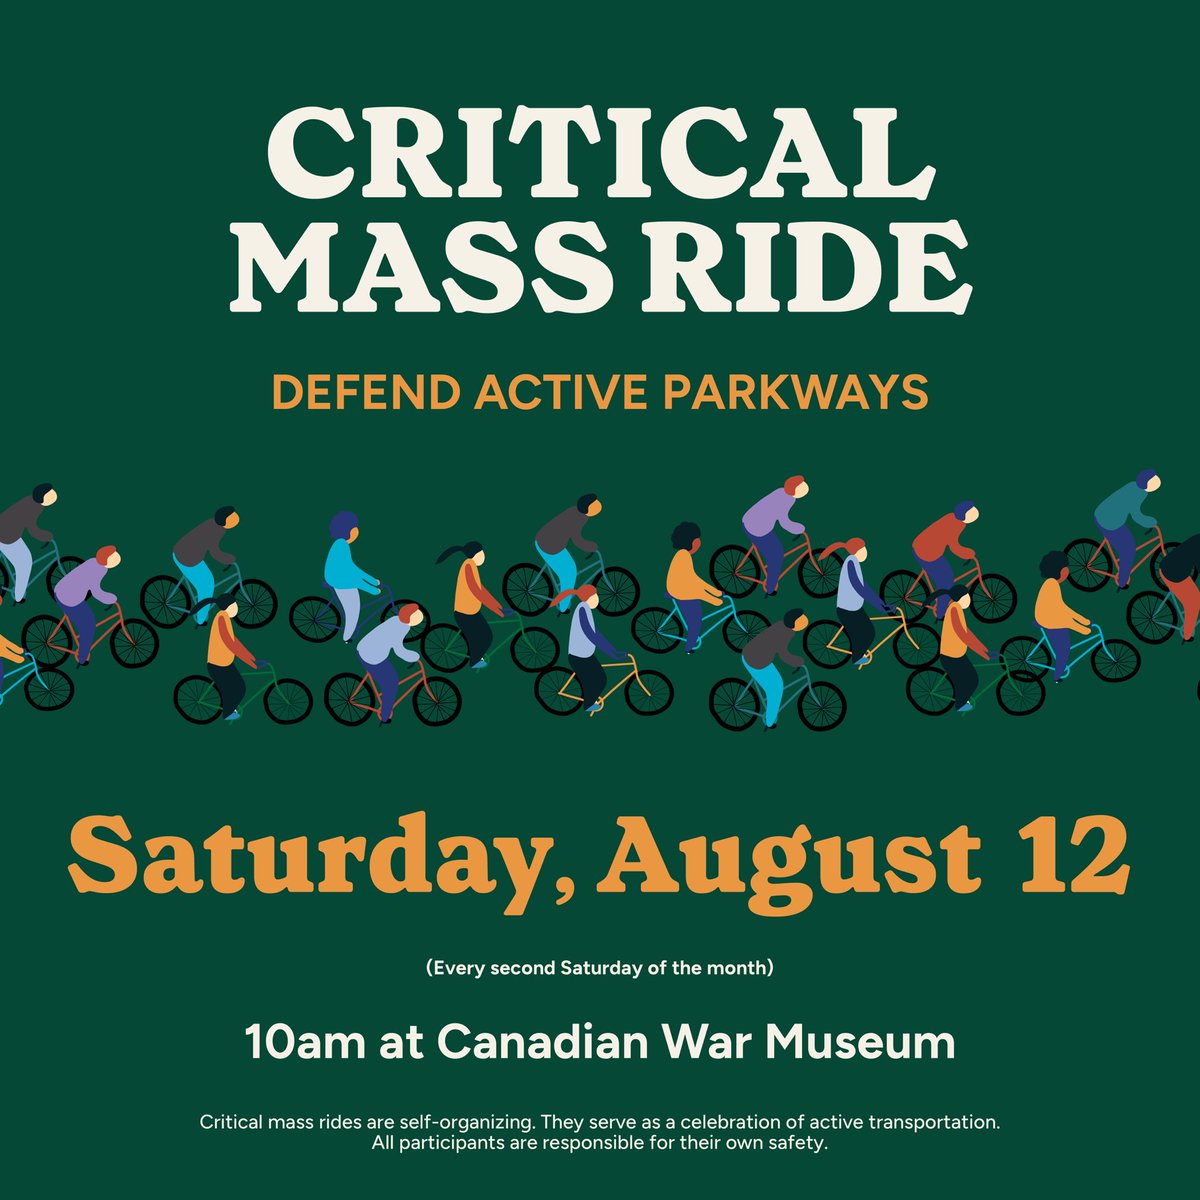 It’s on.  Let’s make this HUGE!!

Active parkways are climate action & critical infrastructure. And they are under threat.

Share, retweet, bring friends & fam. 

#ottbike #ottwalk #ottroll